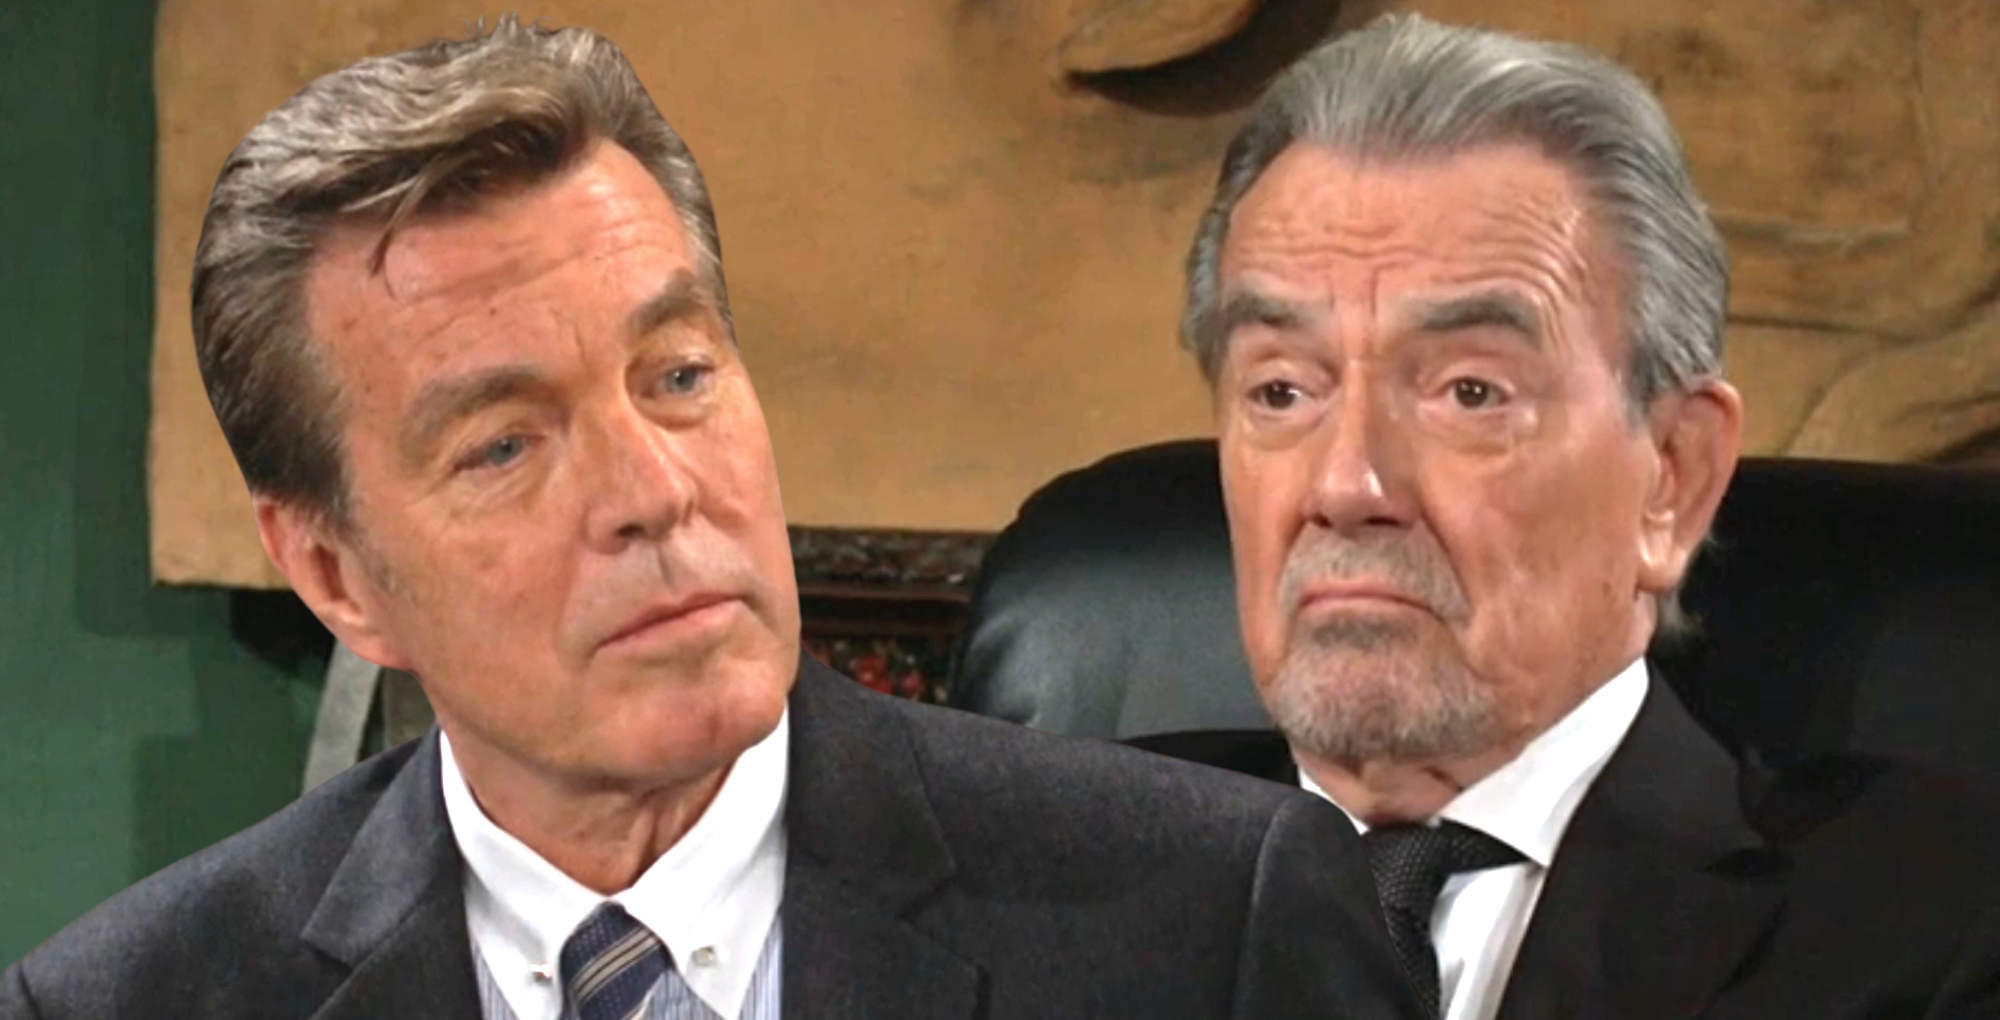 jack abbott and victor newman on the young and the restless.